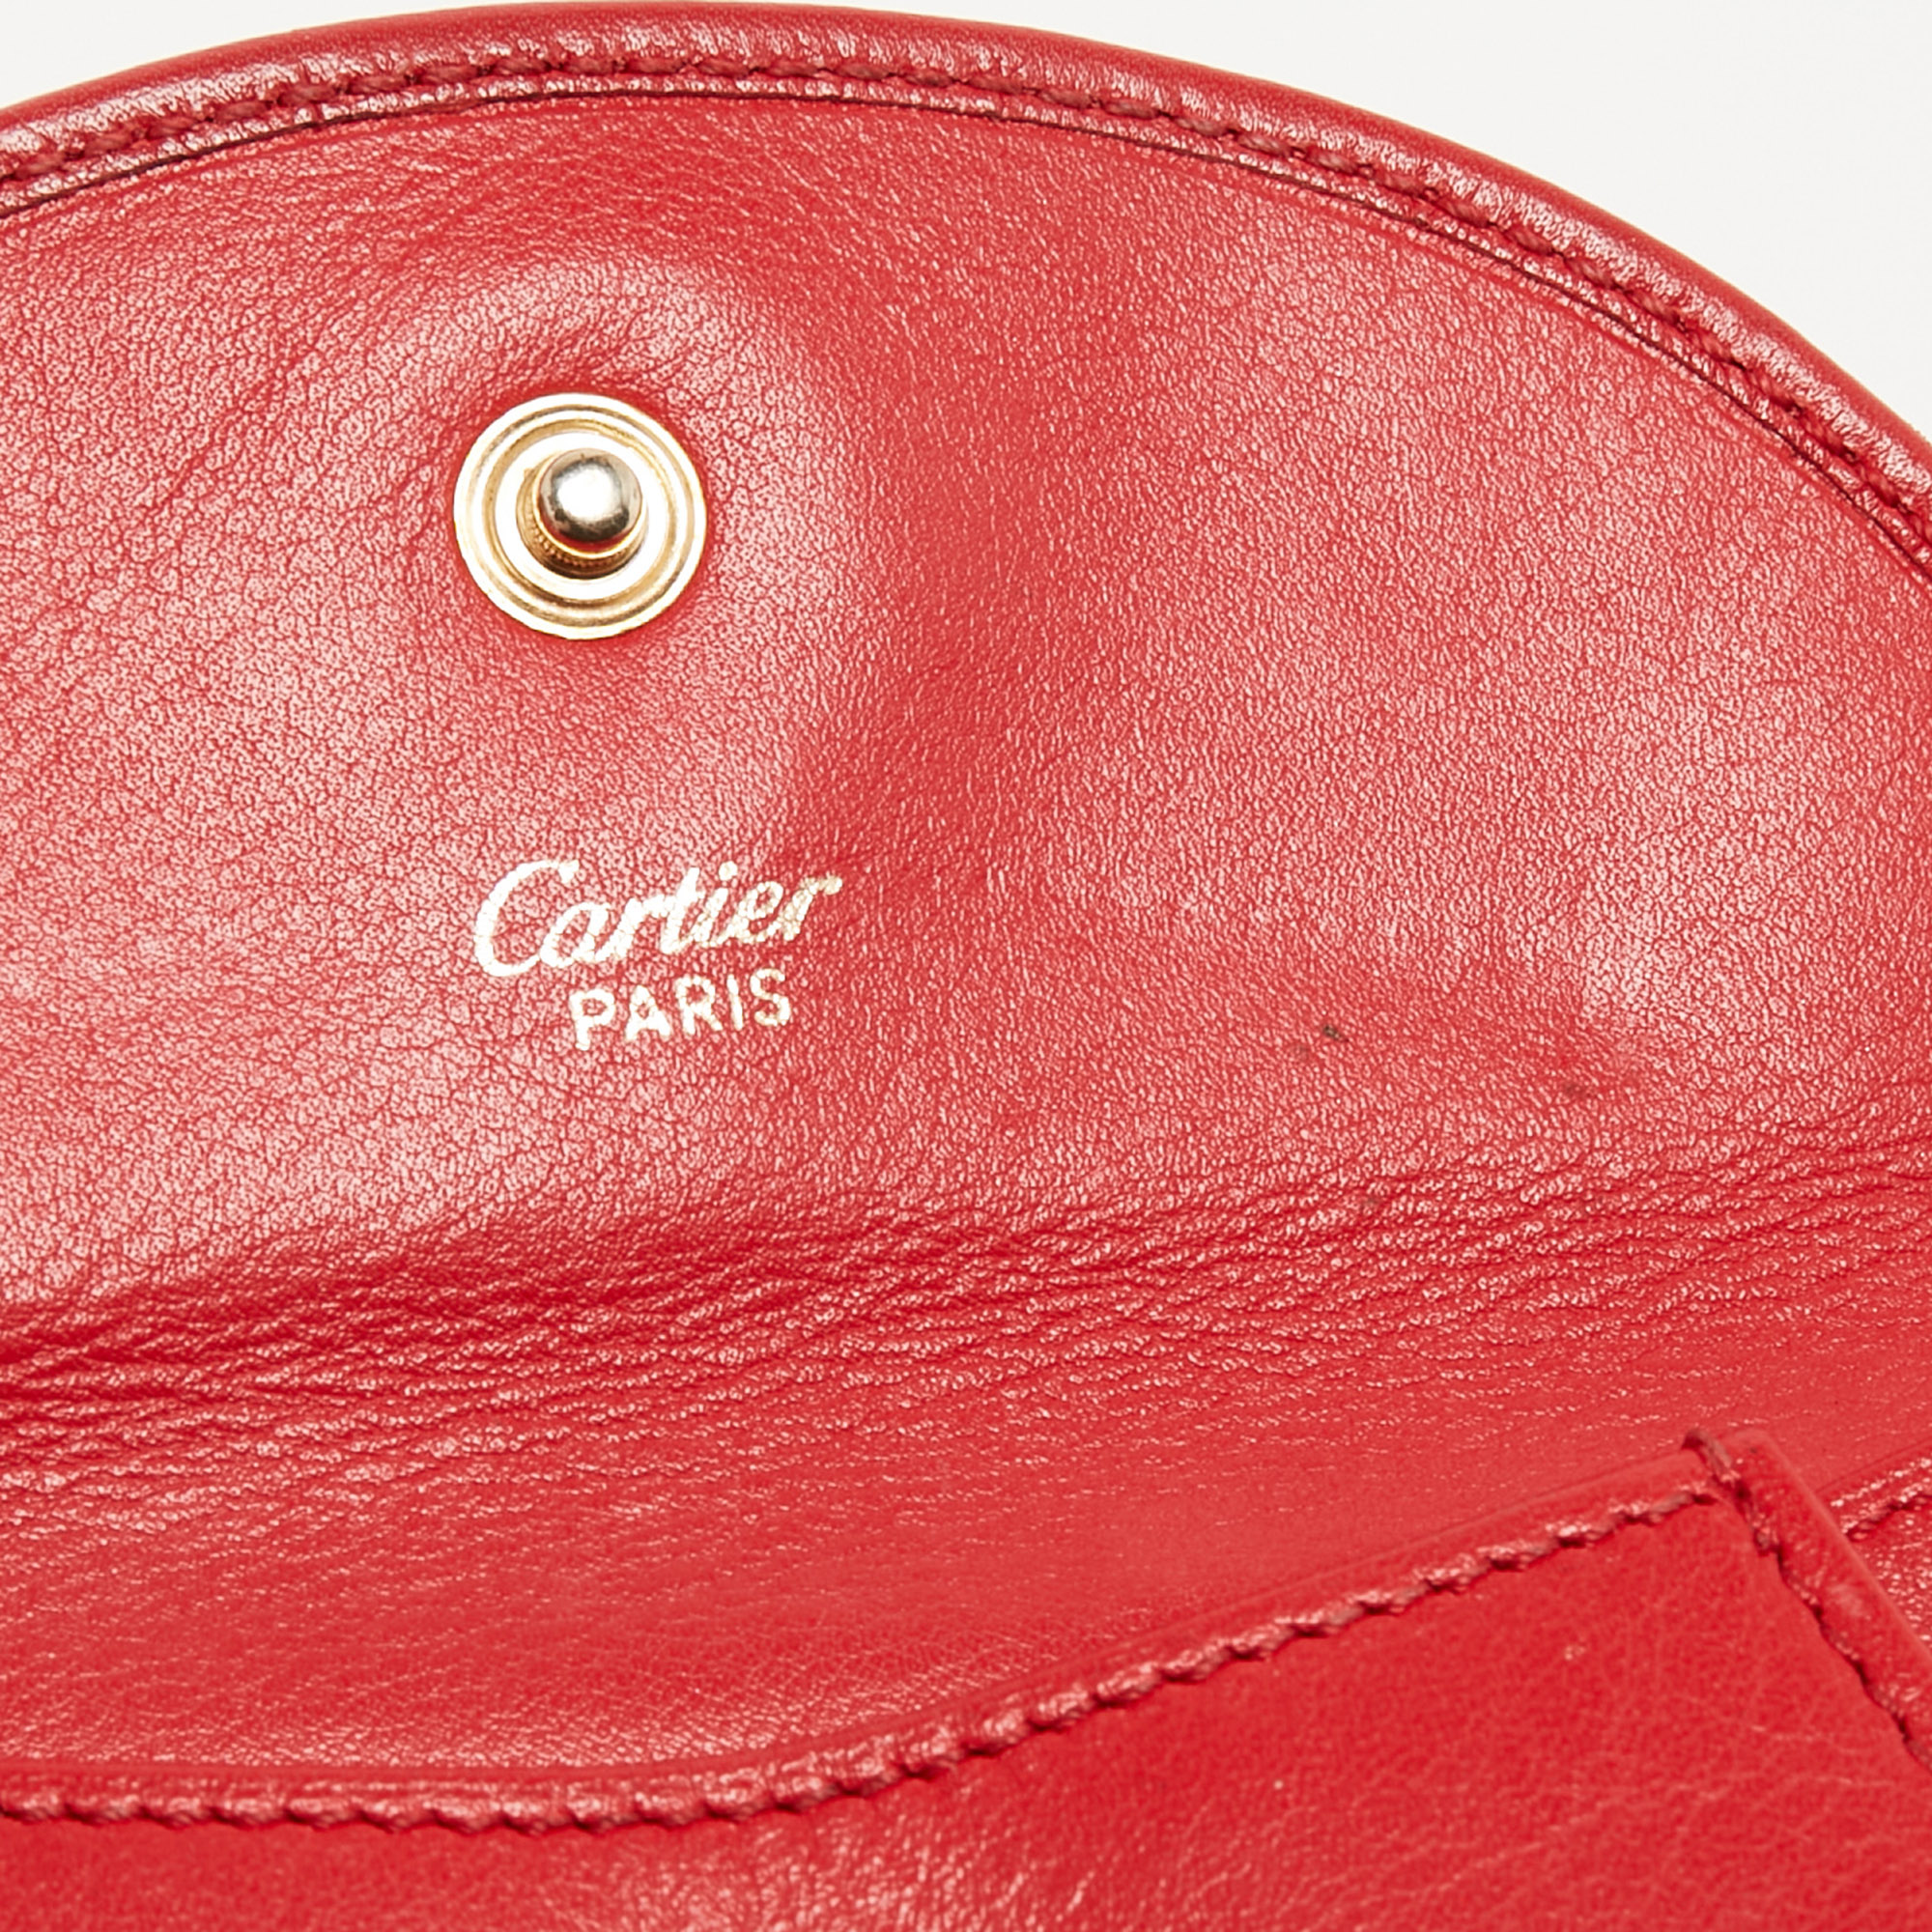 Cartier Red Leather Panthere Flap Coin Pouch